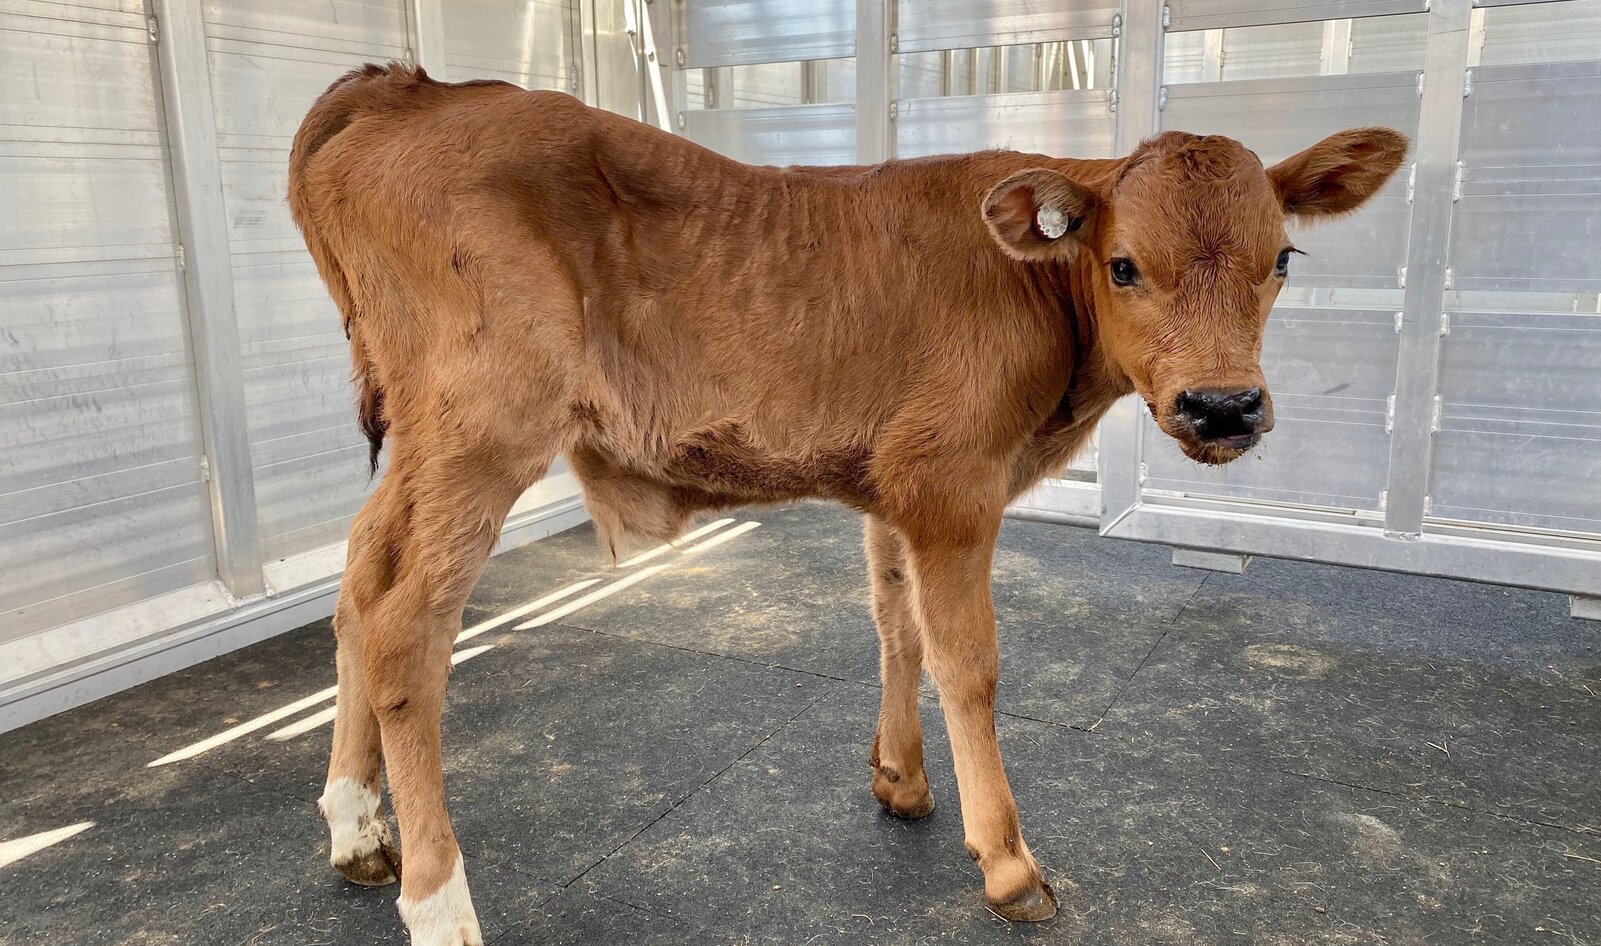 Animal Sanctuary Rescues Calf from Slaughter, Names Him After Late Civil Rights Legend John Lewis